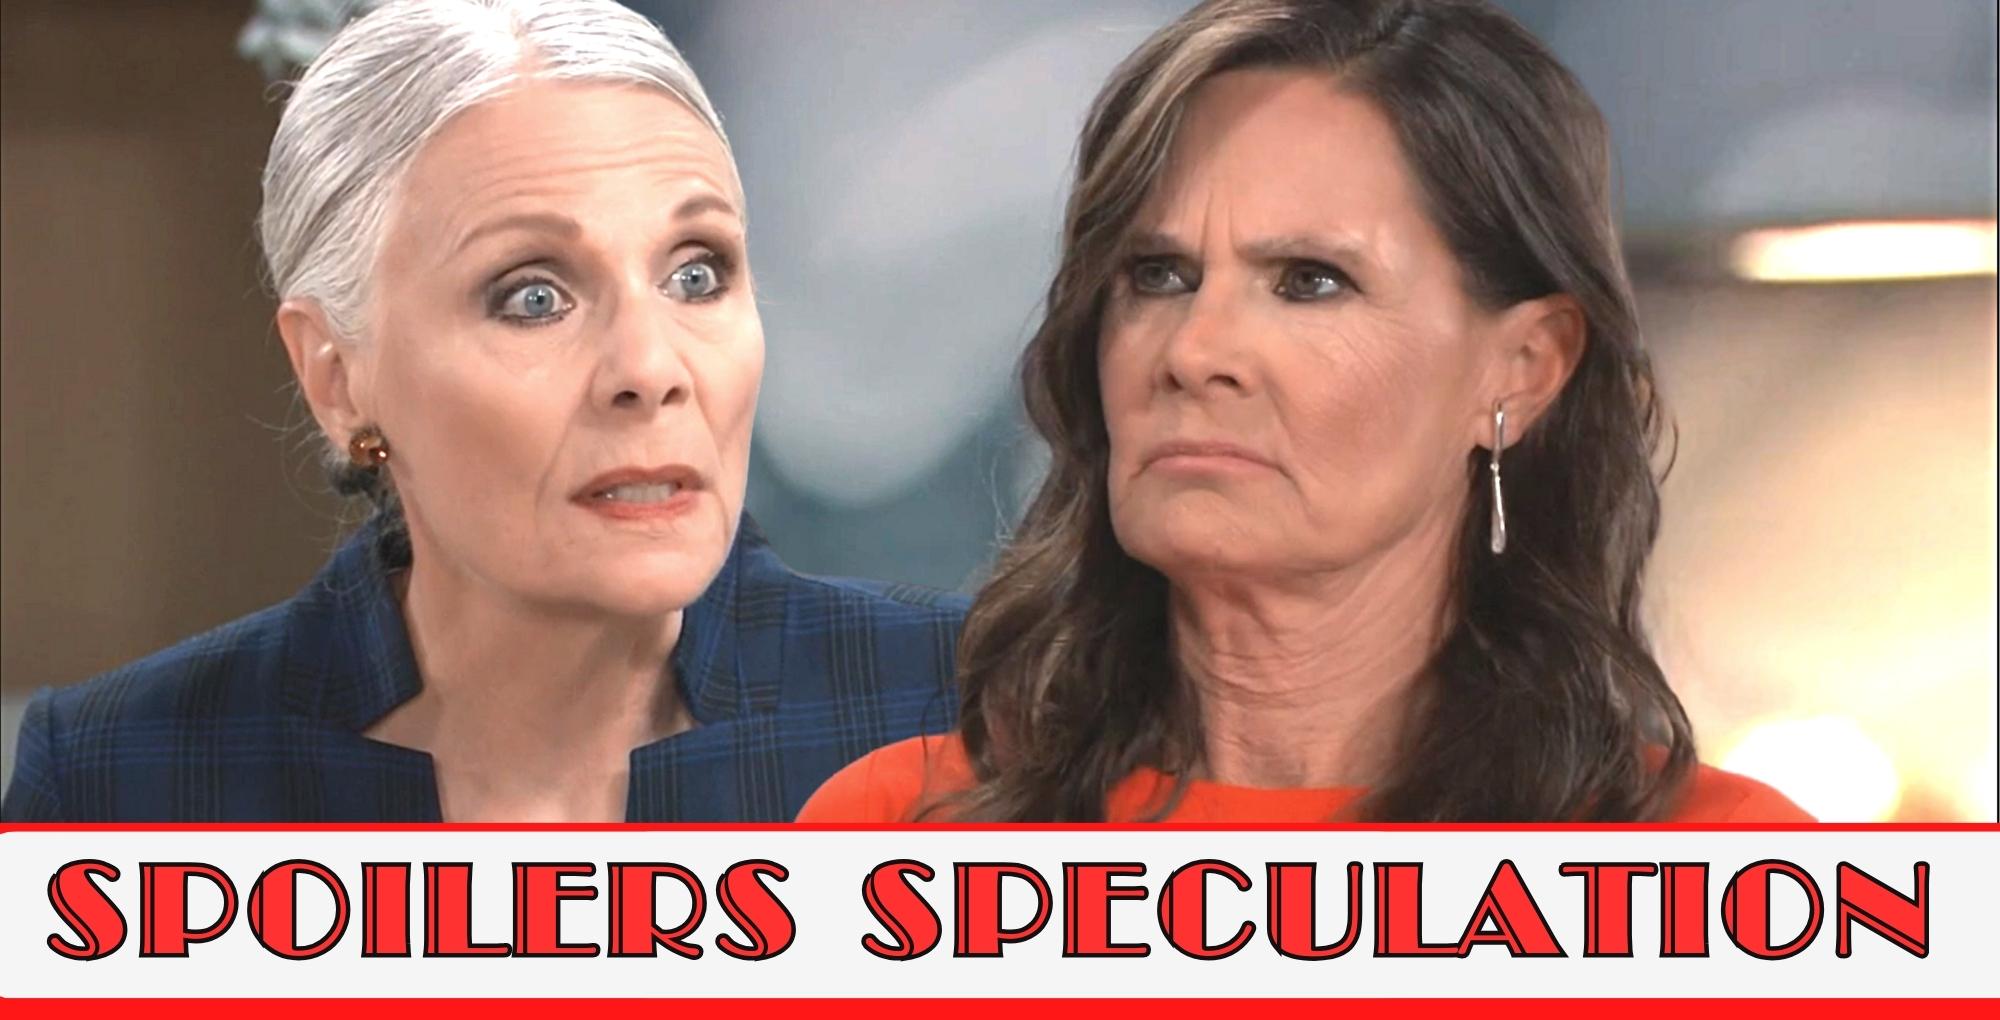 gh spoilers speculation about tracy and lucy facing off.